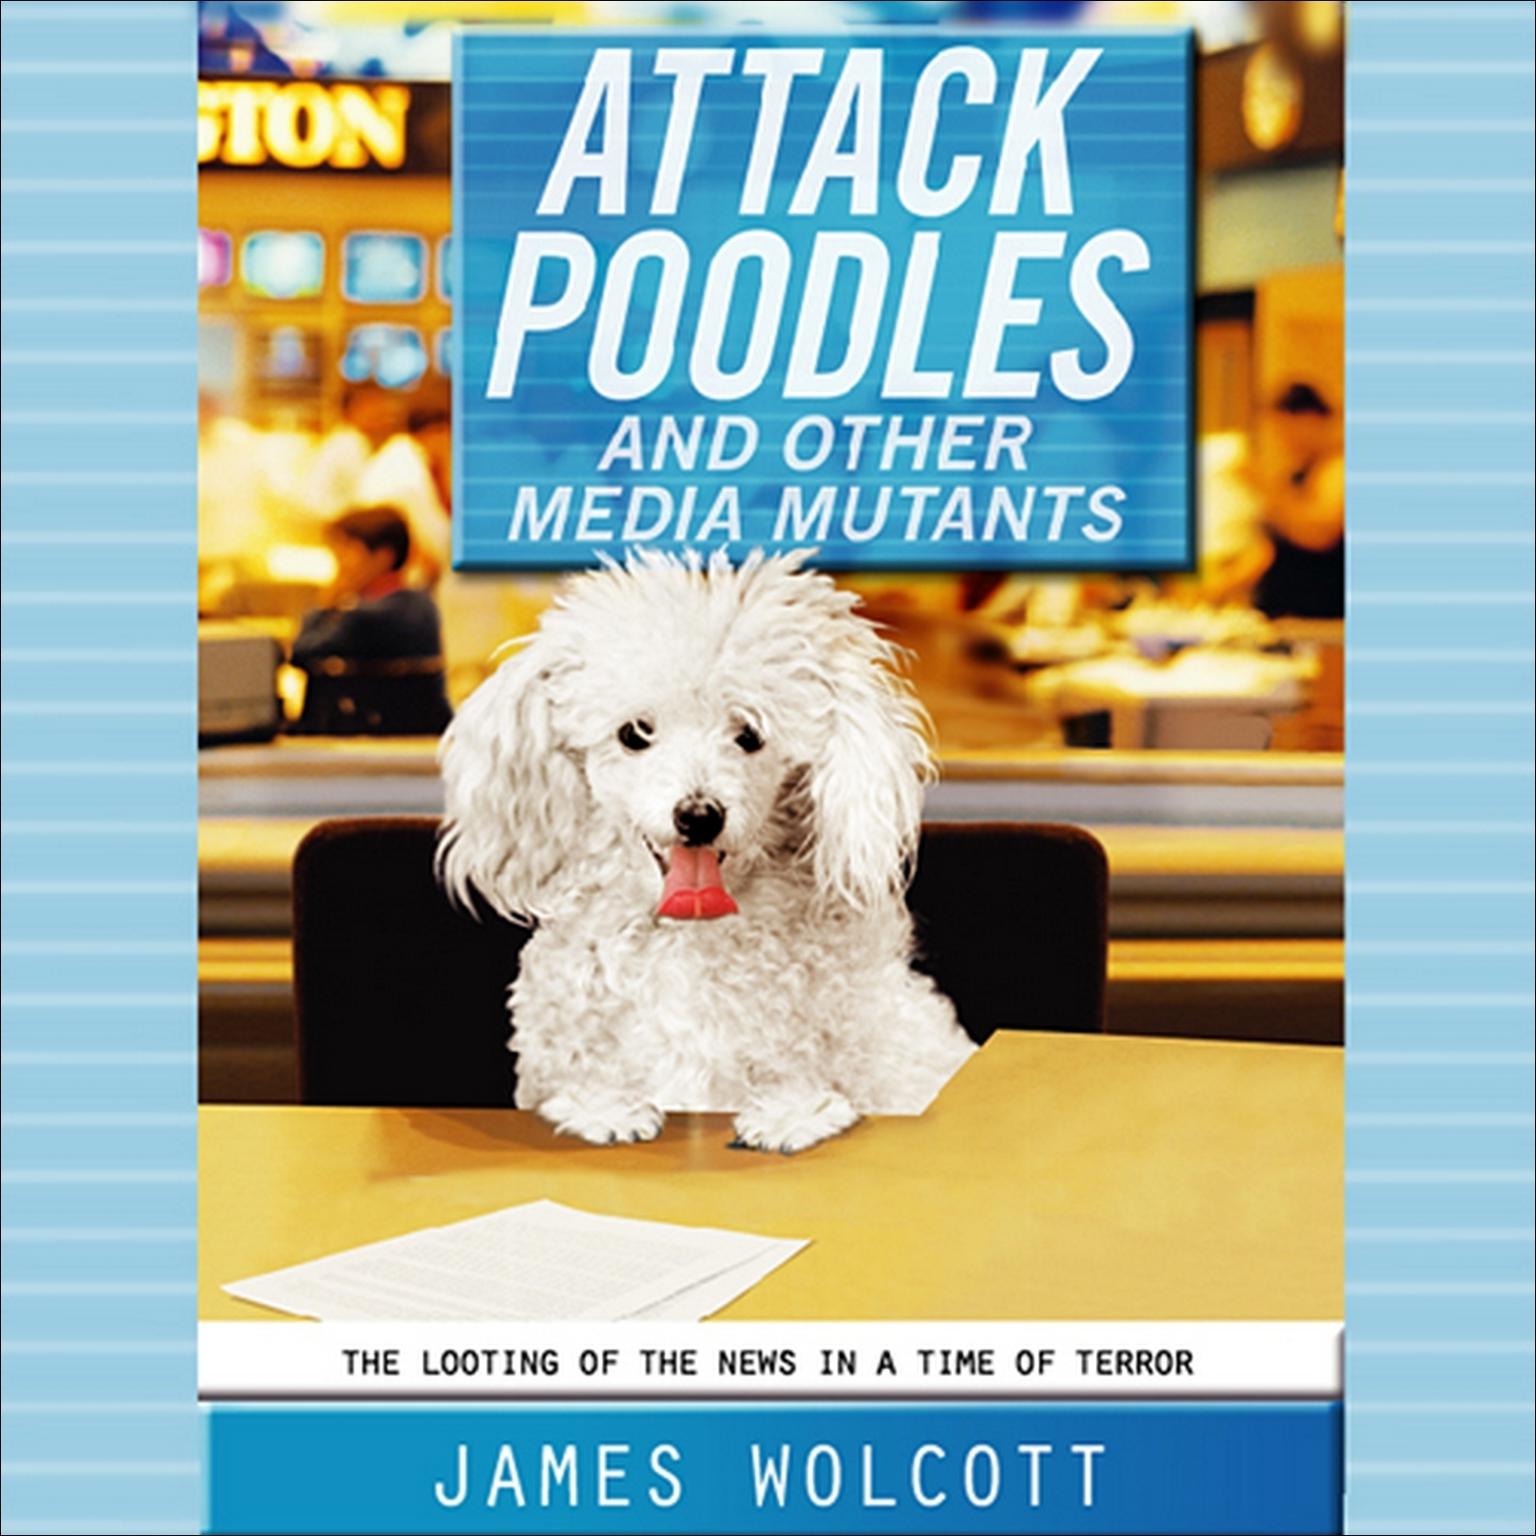 Attack Poodles and Other Media Mutants: The Looting of the News in a Time of Terror Audiobook, by James Wolcott